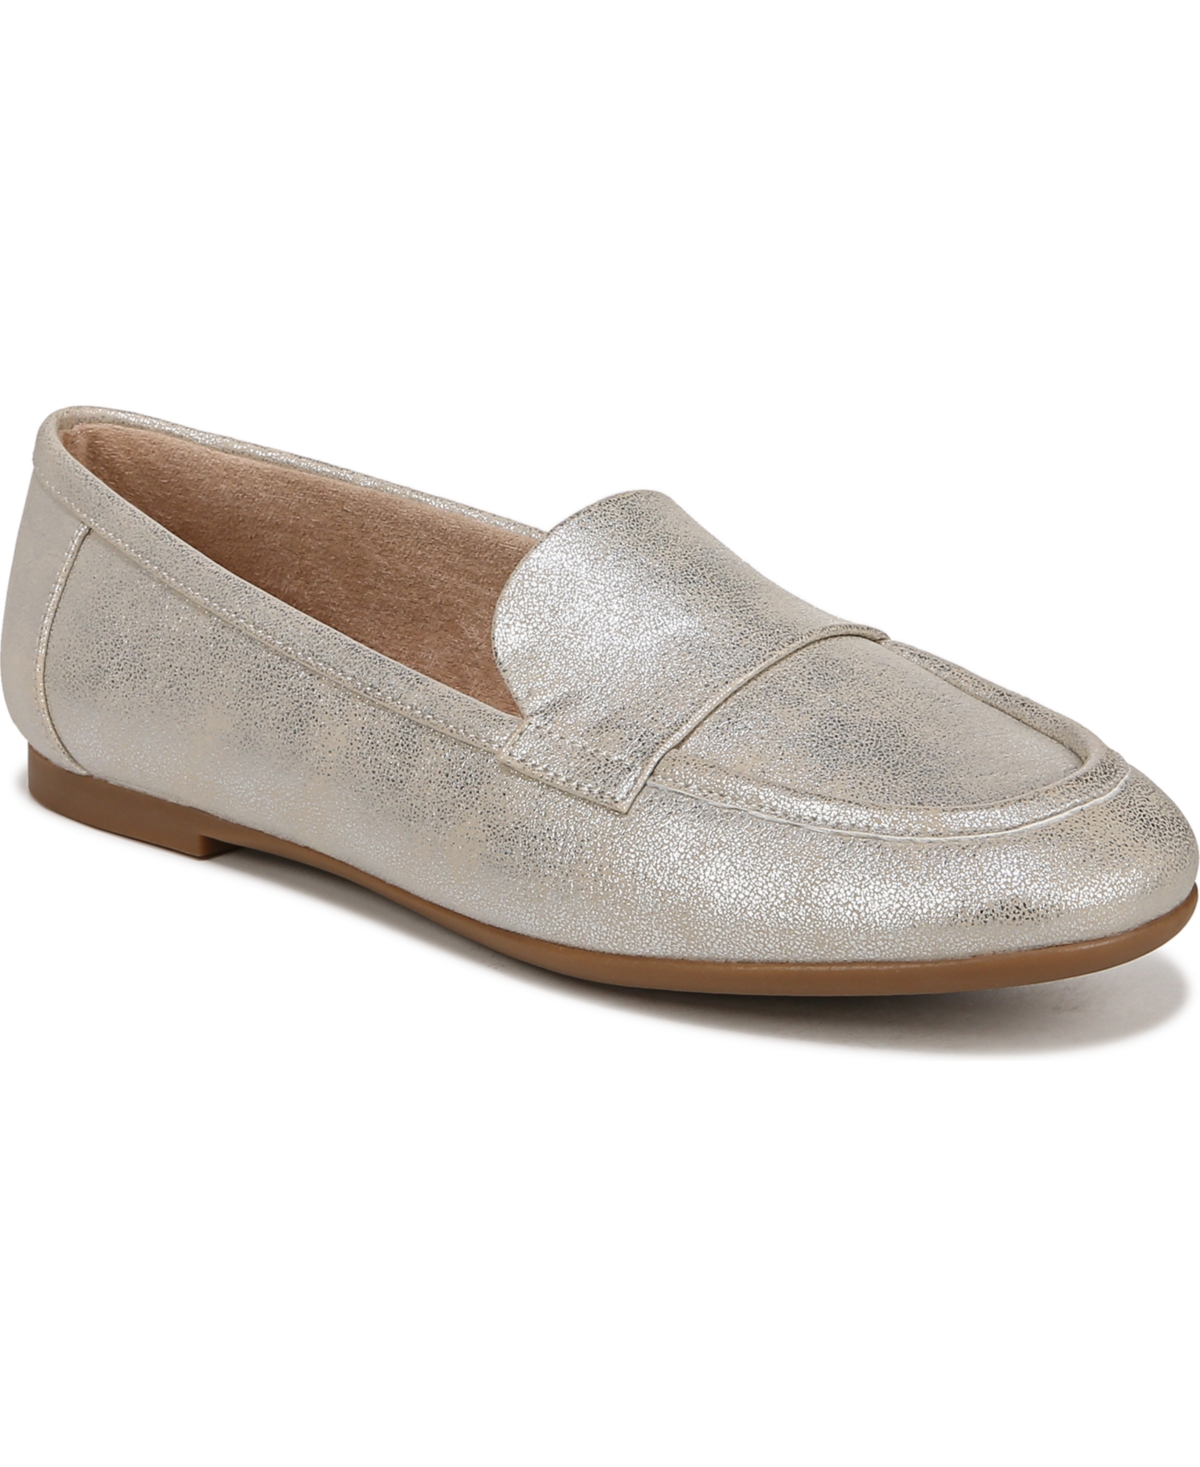 Bebe Loafers - Silver Faux Leather